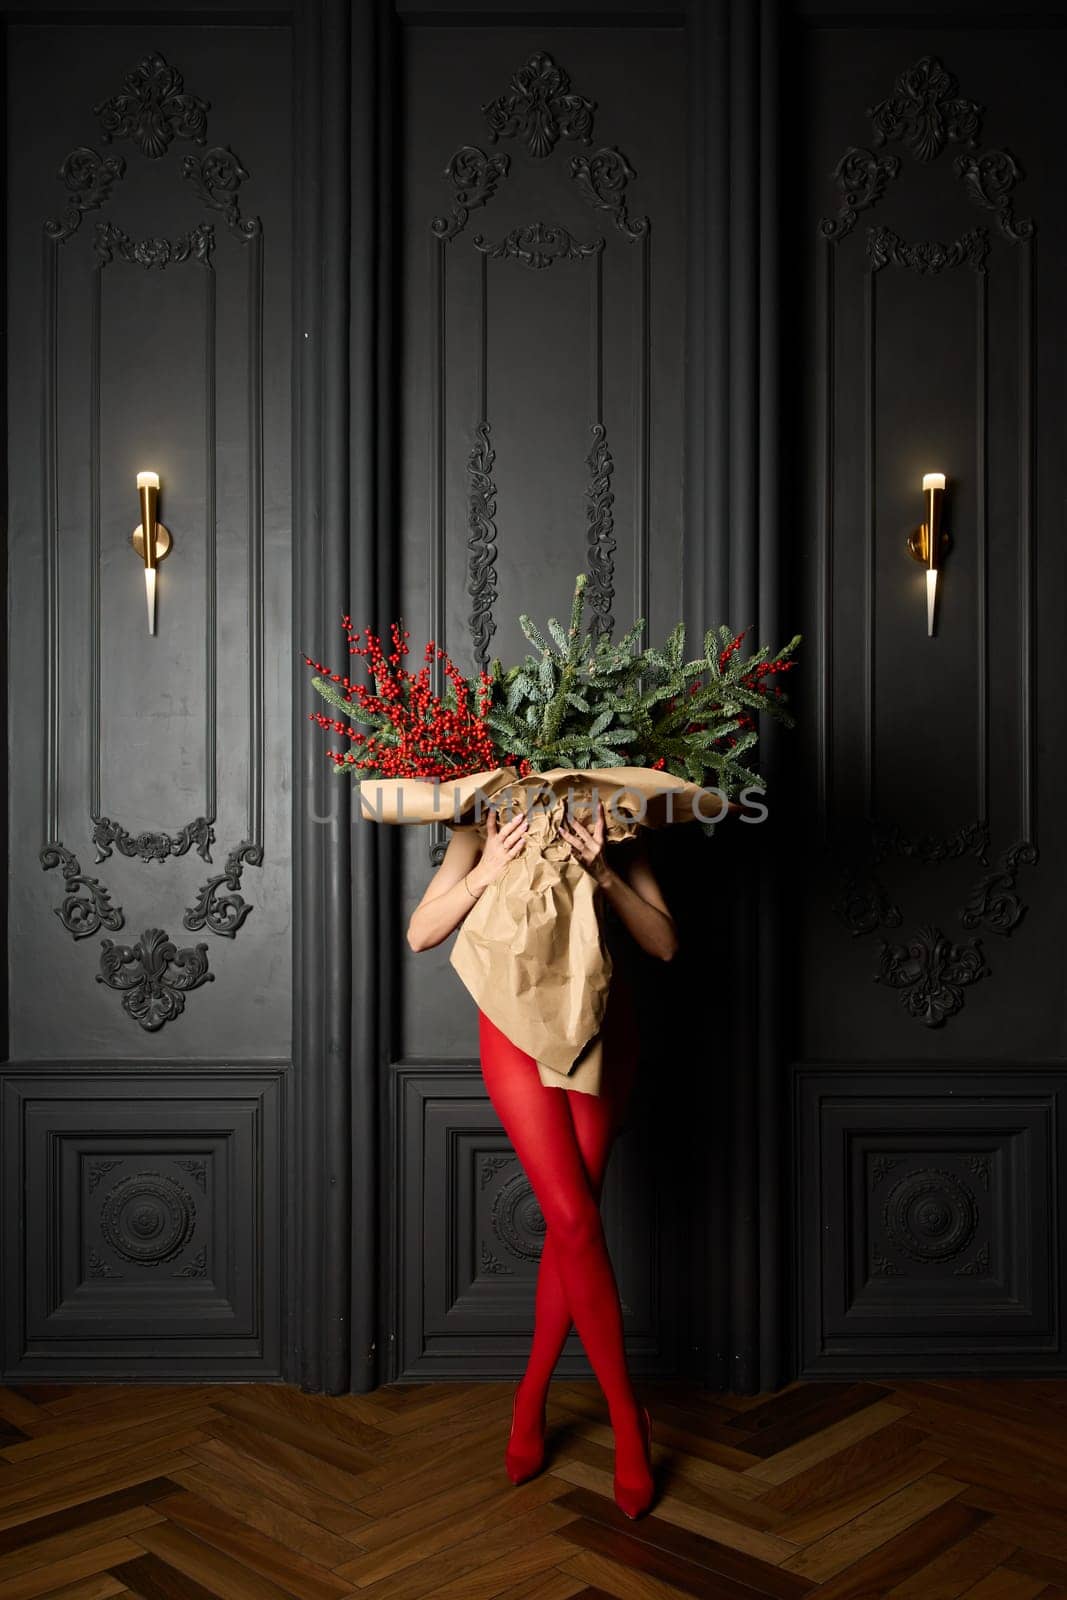 A long girl in red tights and high-heeled shoes holds a huge bouquet of fir branches and red berries wrapped in cardboard paper, she closes with a bouquet, photo studio with grey wall background by vladimirdrozdin